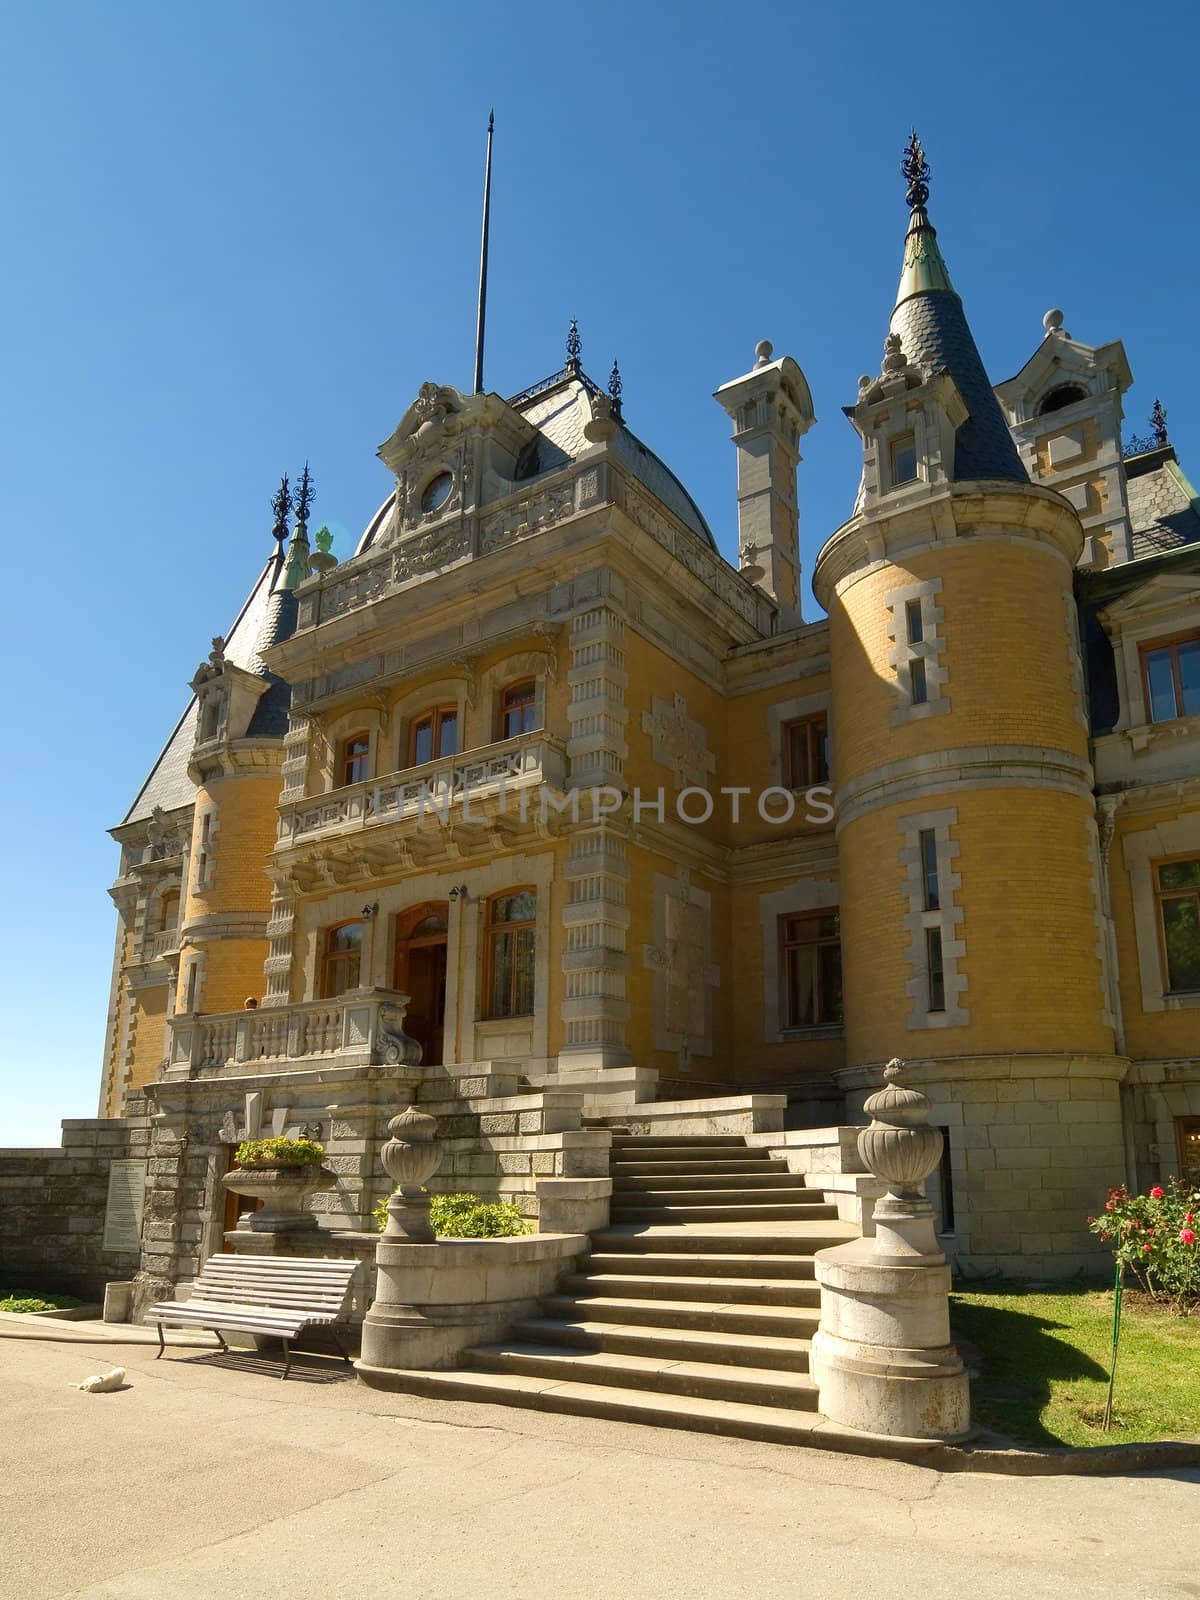 Massandra Palace in Yalta with clear blue sky